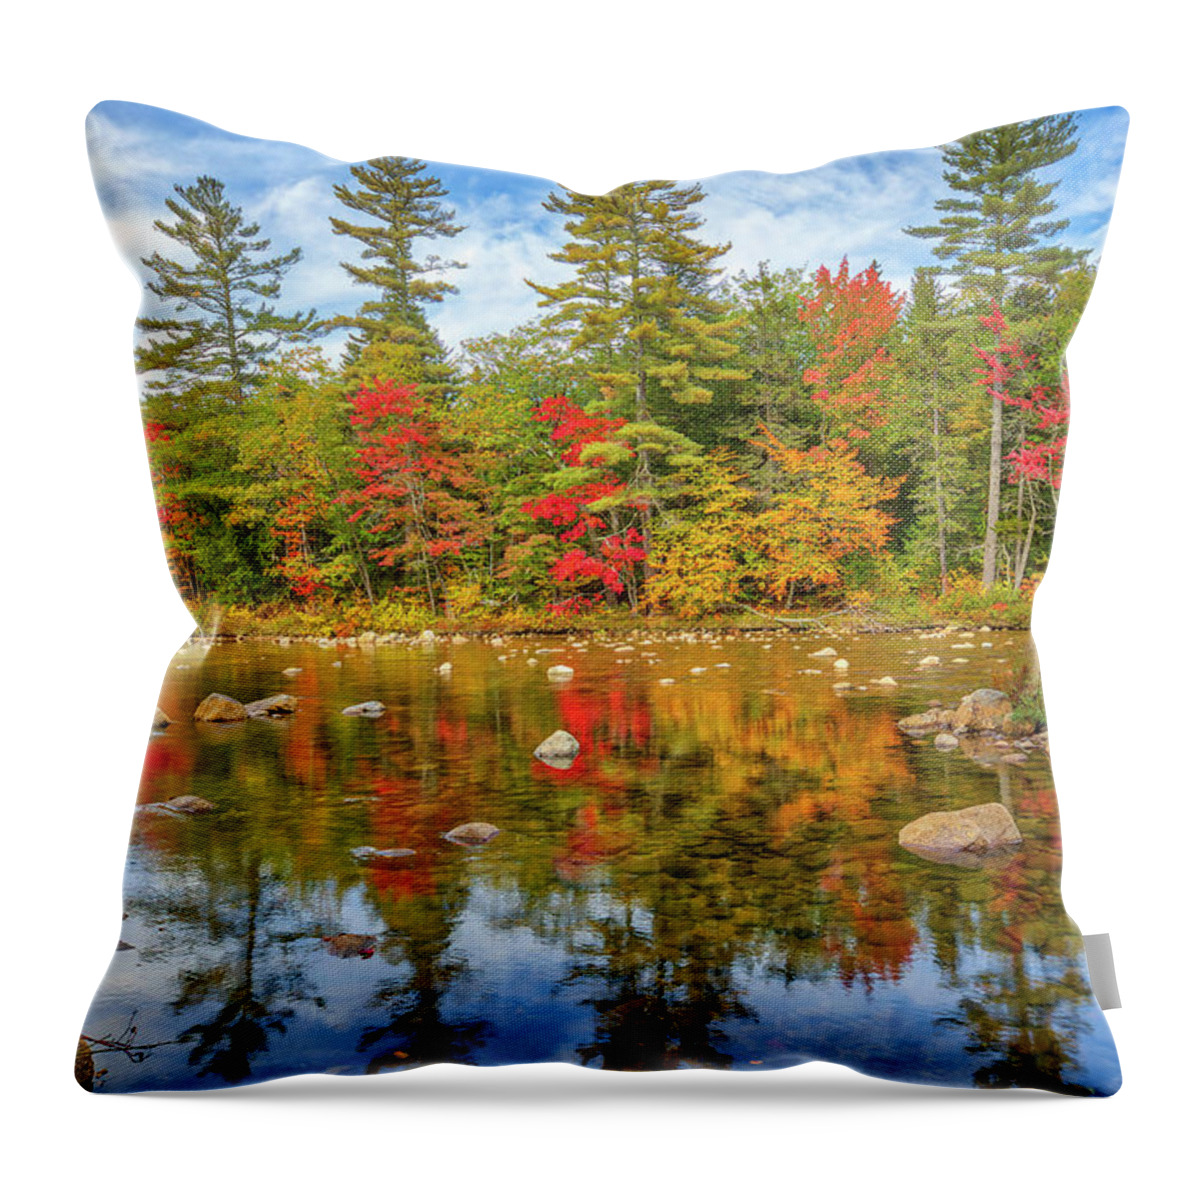 Swift River Throw Pillow featuring the photograph Swift River New Hampshire Kancamagus Highway Fall Foliage by Juergen Roth